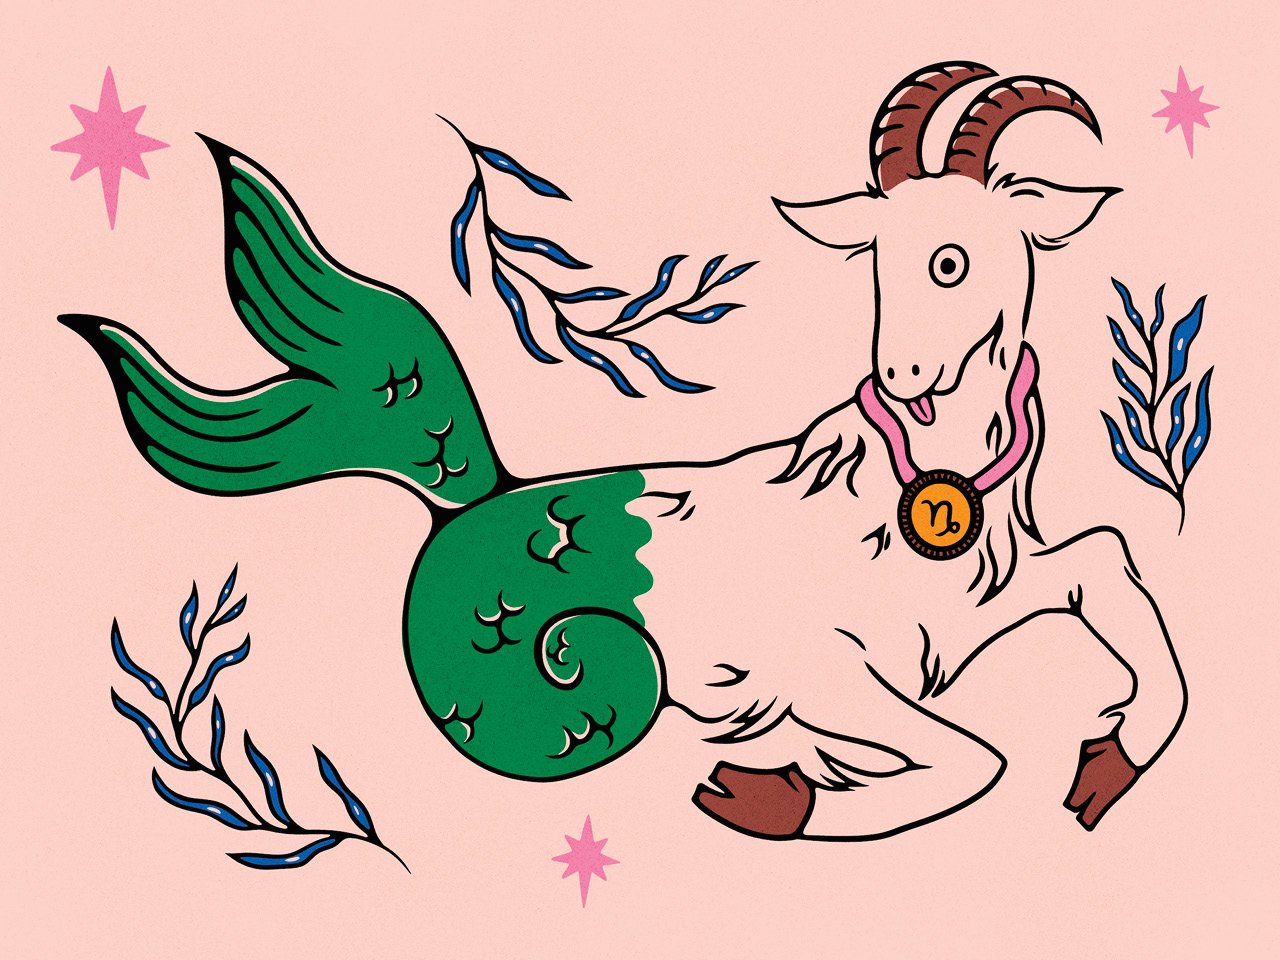 An illustration of a goat with a green mermaid tail. The goat is sticking out its tongue and wearing a medallion around its neck. the medallino has the Capricorn symbol on it.